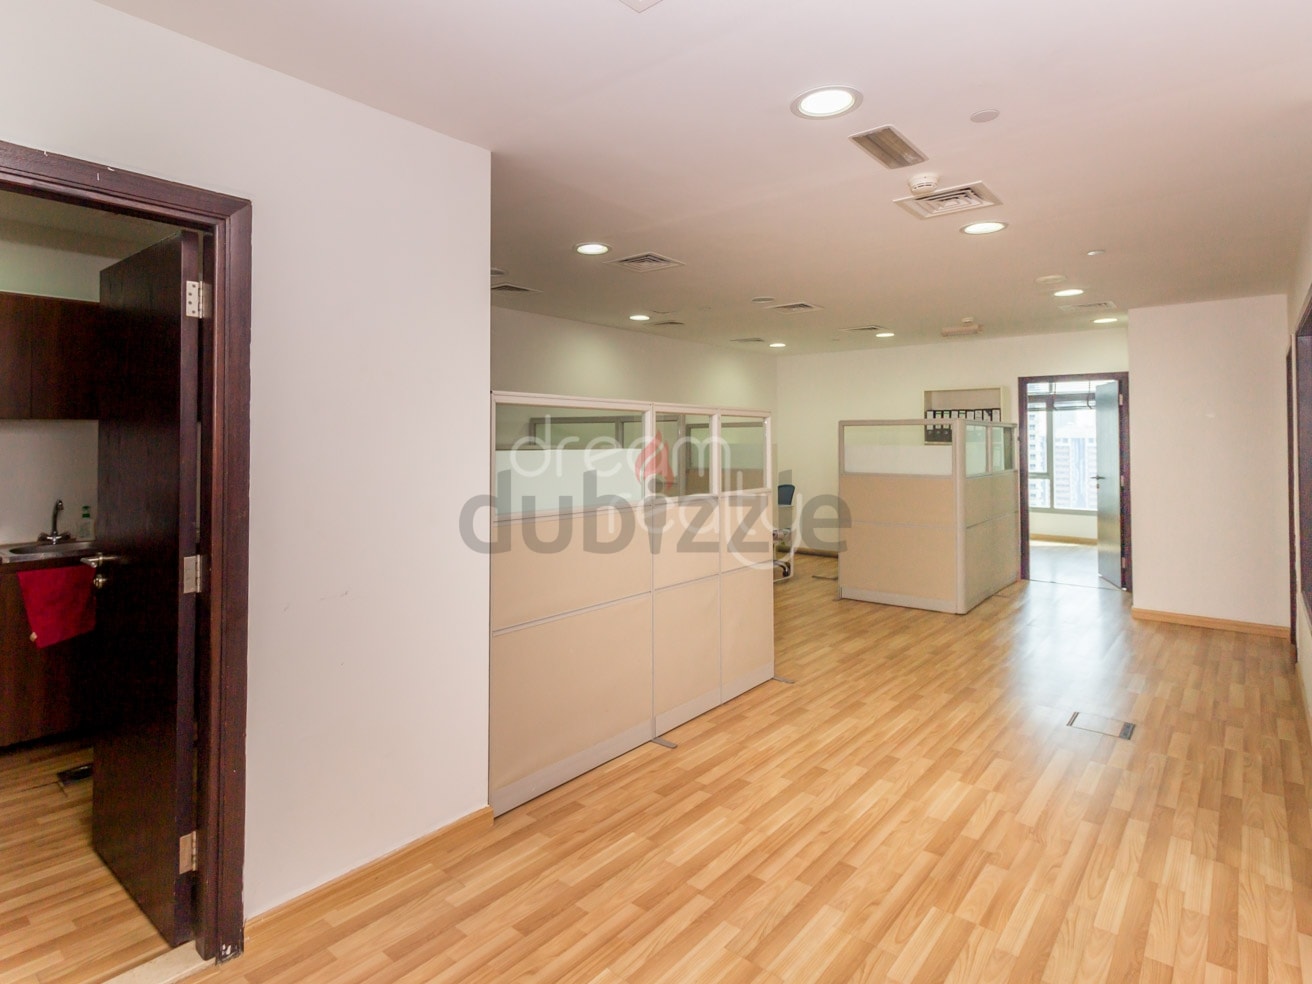 Vacant Fully Fitted Furnished Spacious Office L Near Metro